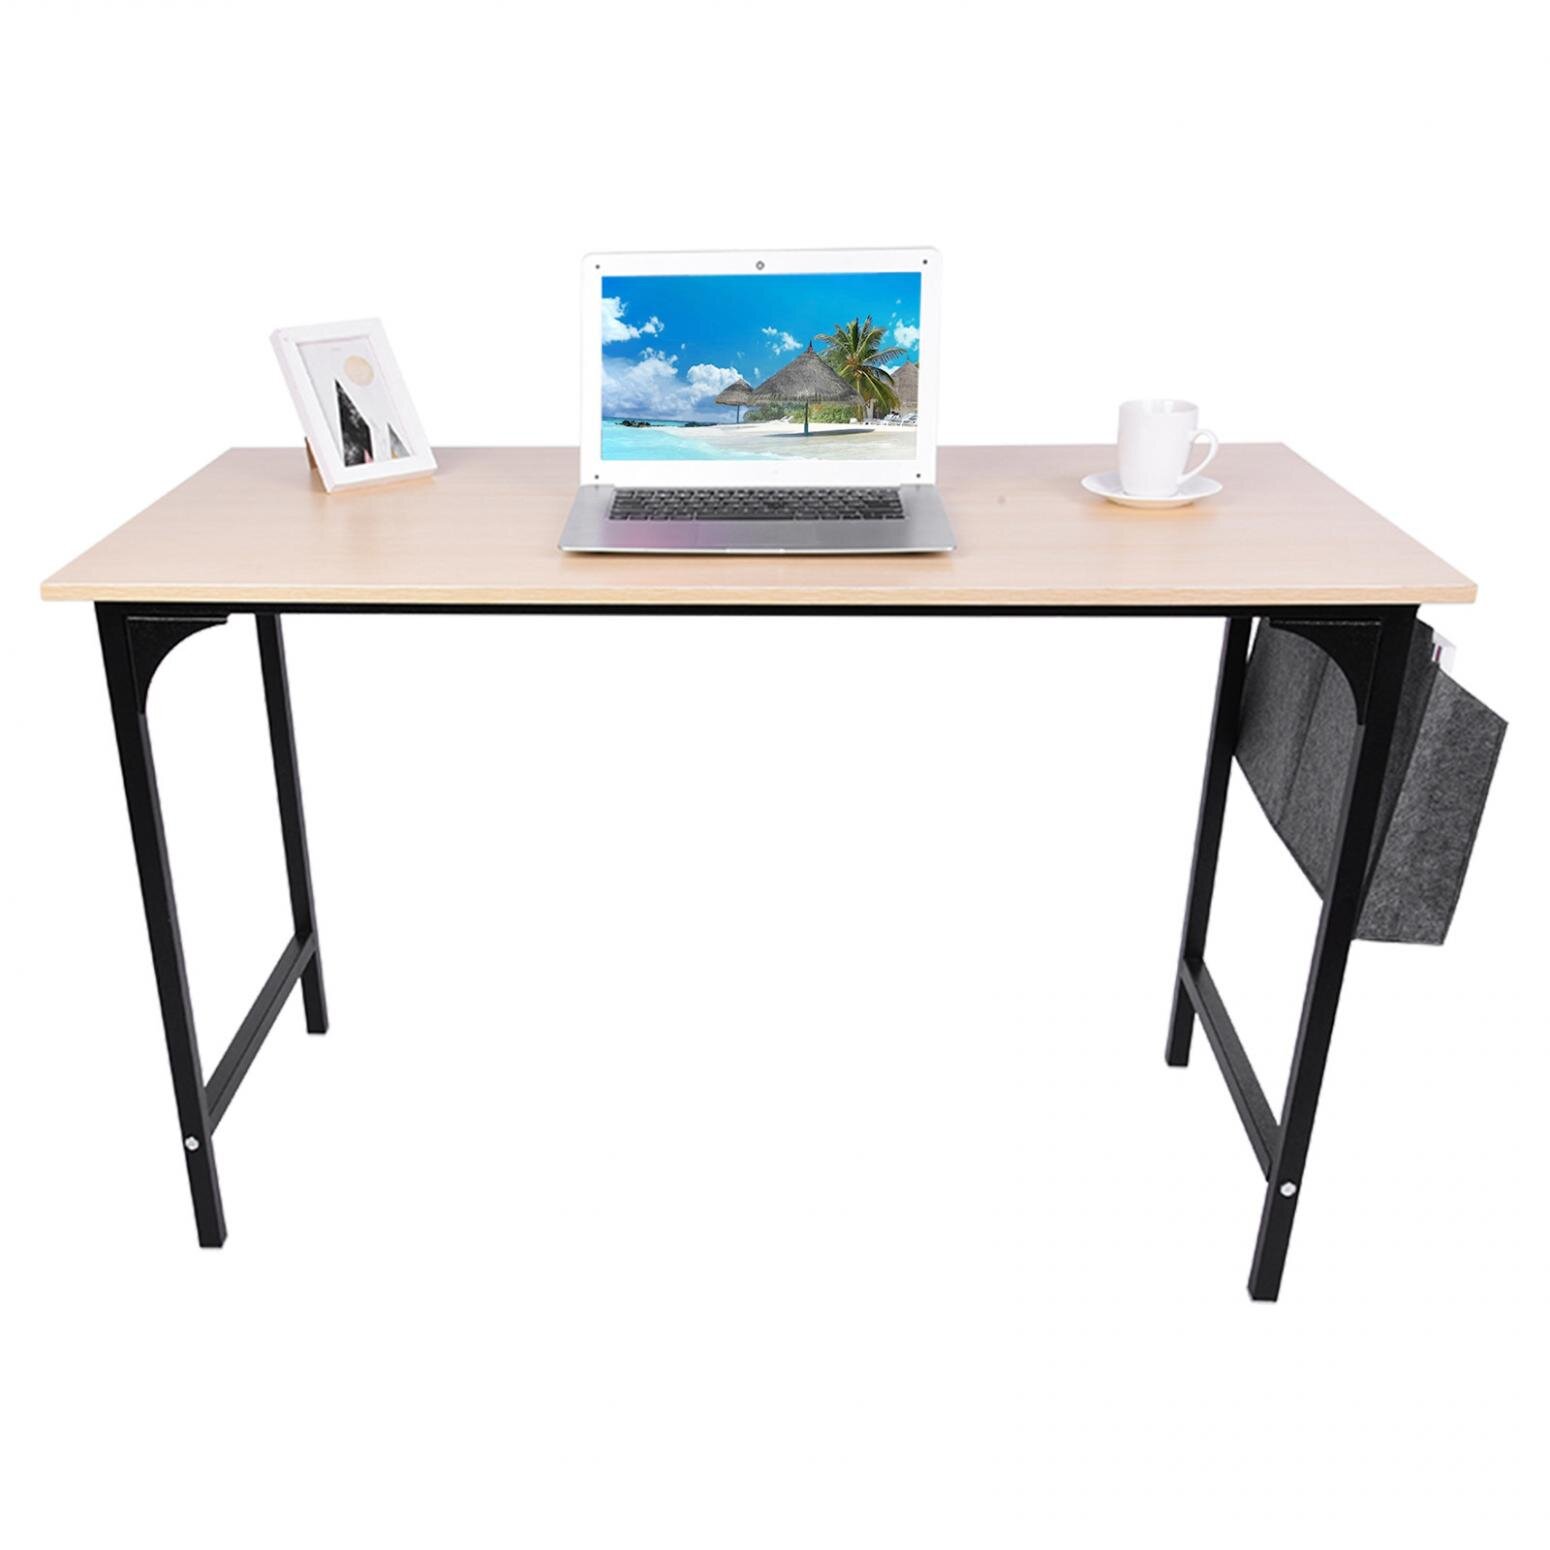 Details about   Modern Writing Computer Desk Folding Table Laptop PC Study Workstation Office US 